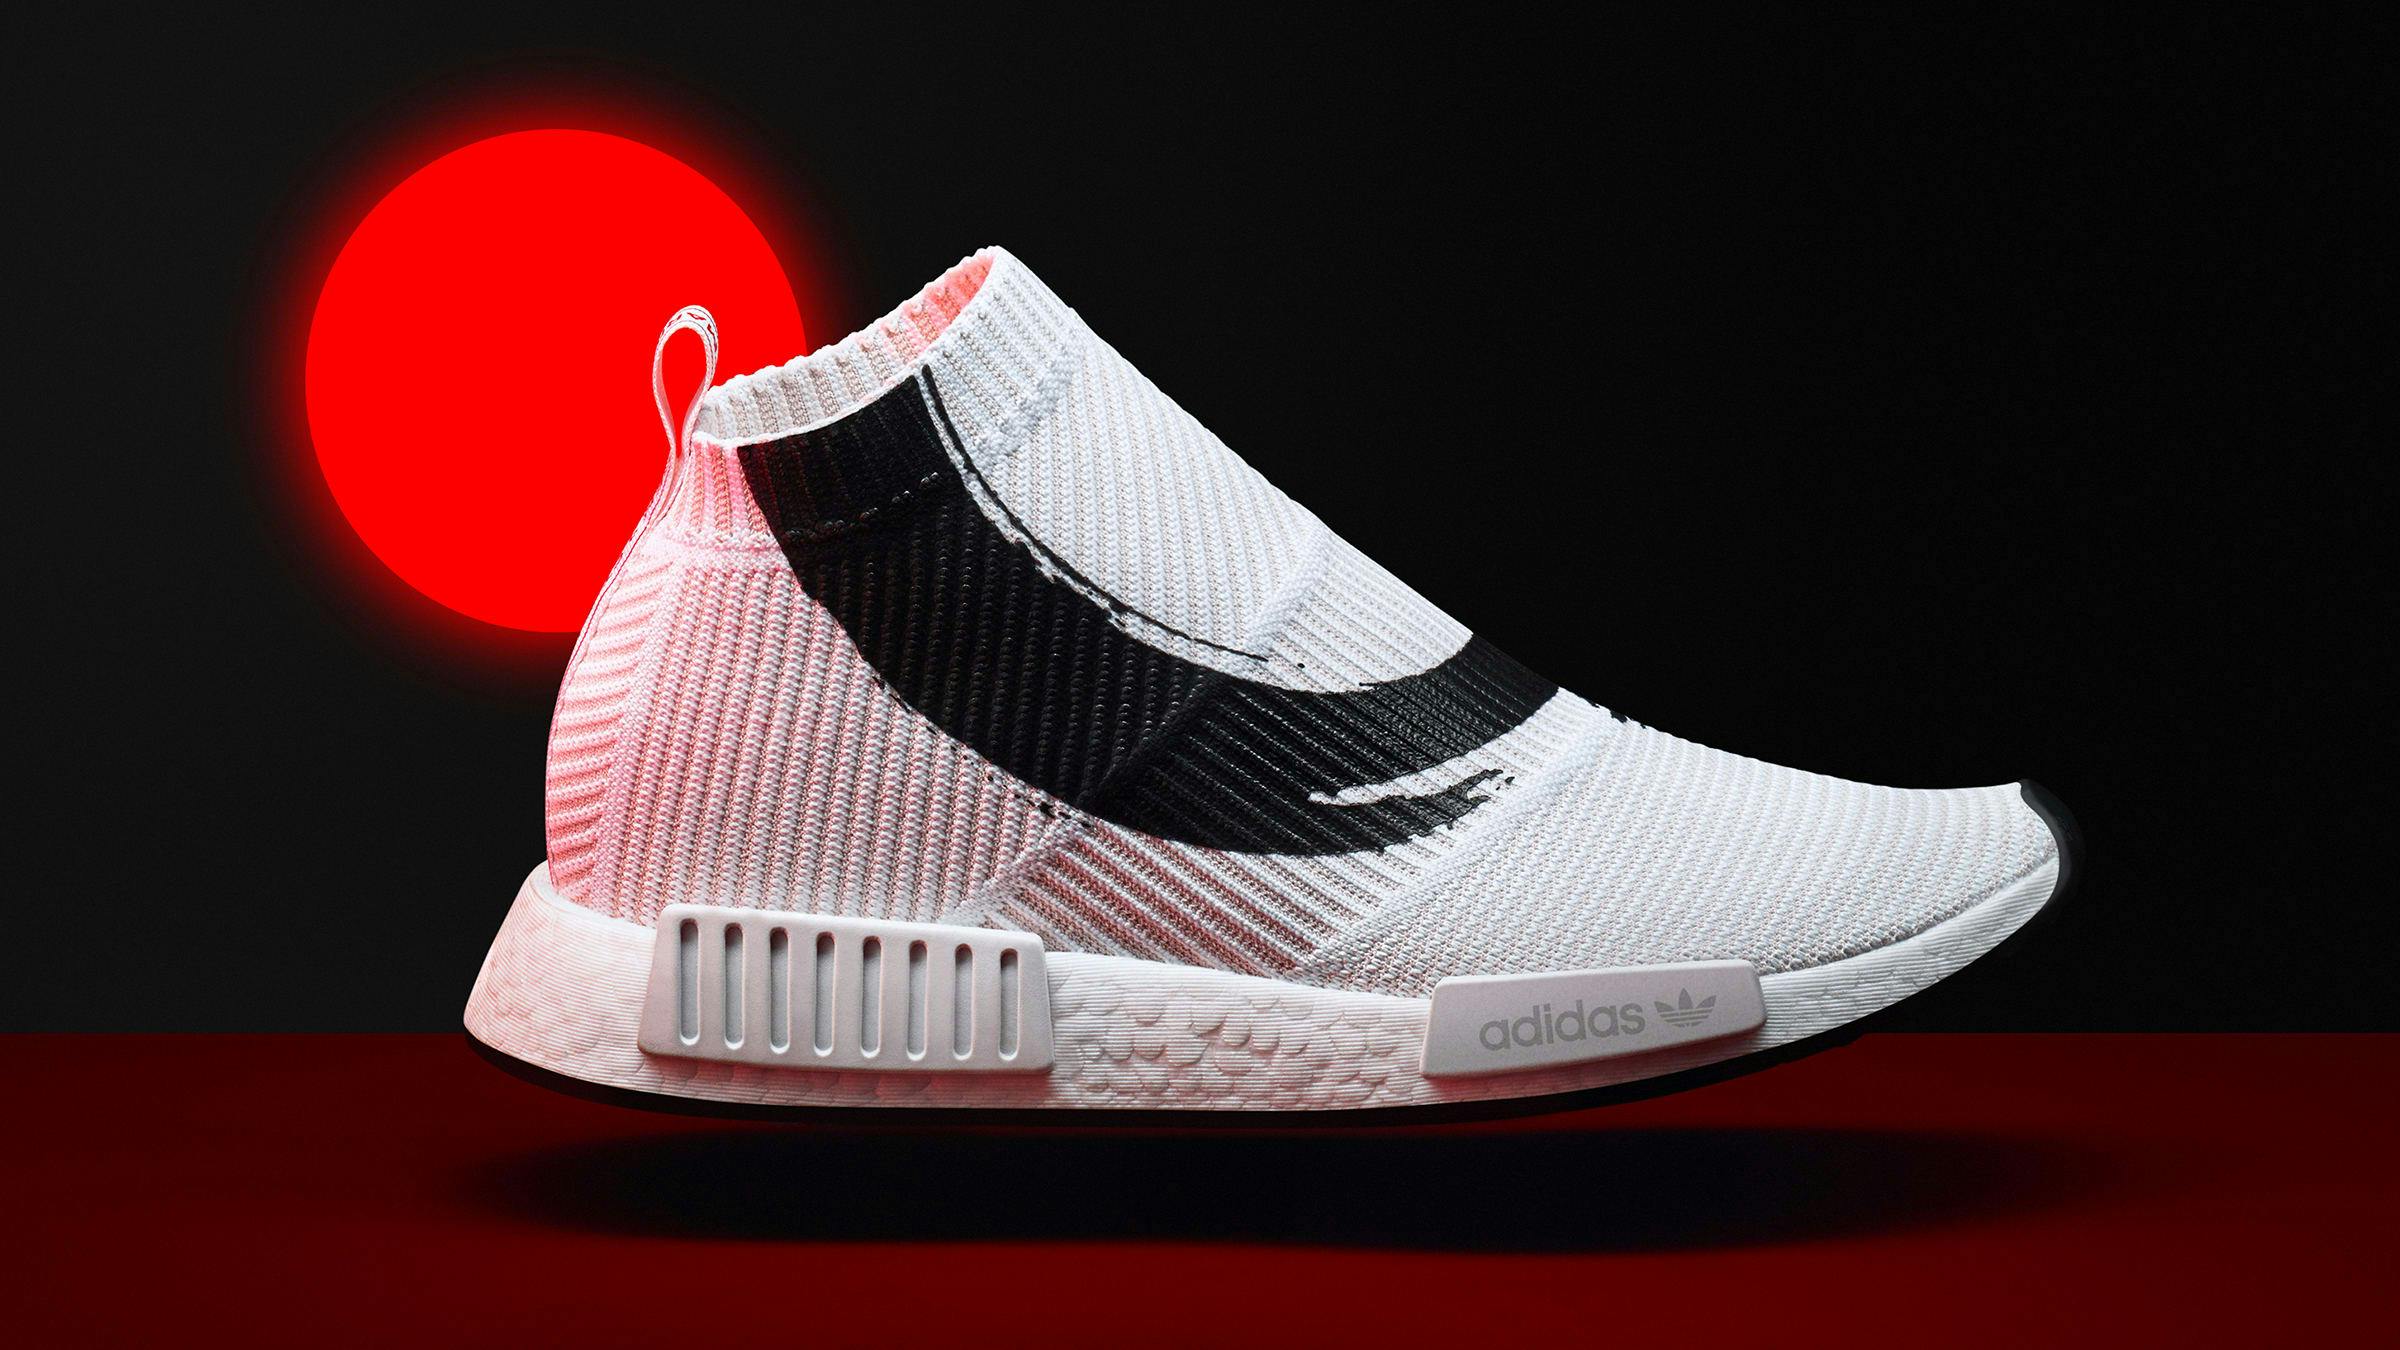 Ceder el paso Portavoz Electricista adidas Energy NMD_CS1 PK - Register Now on END. (Global) Launches | END.  (Global)